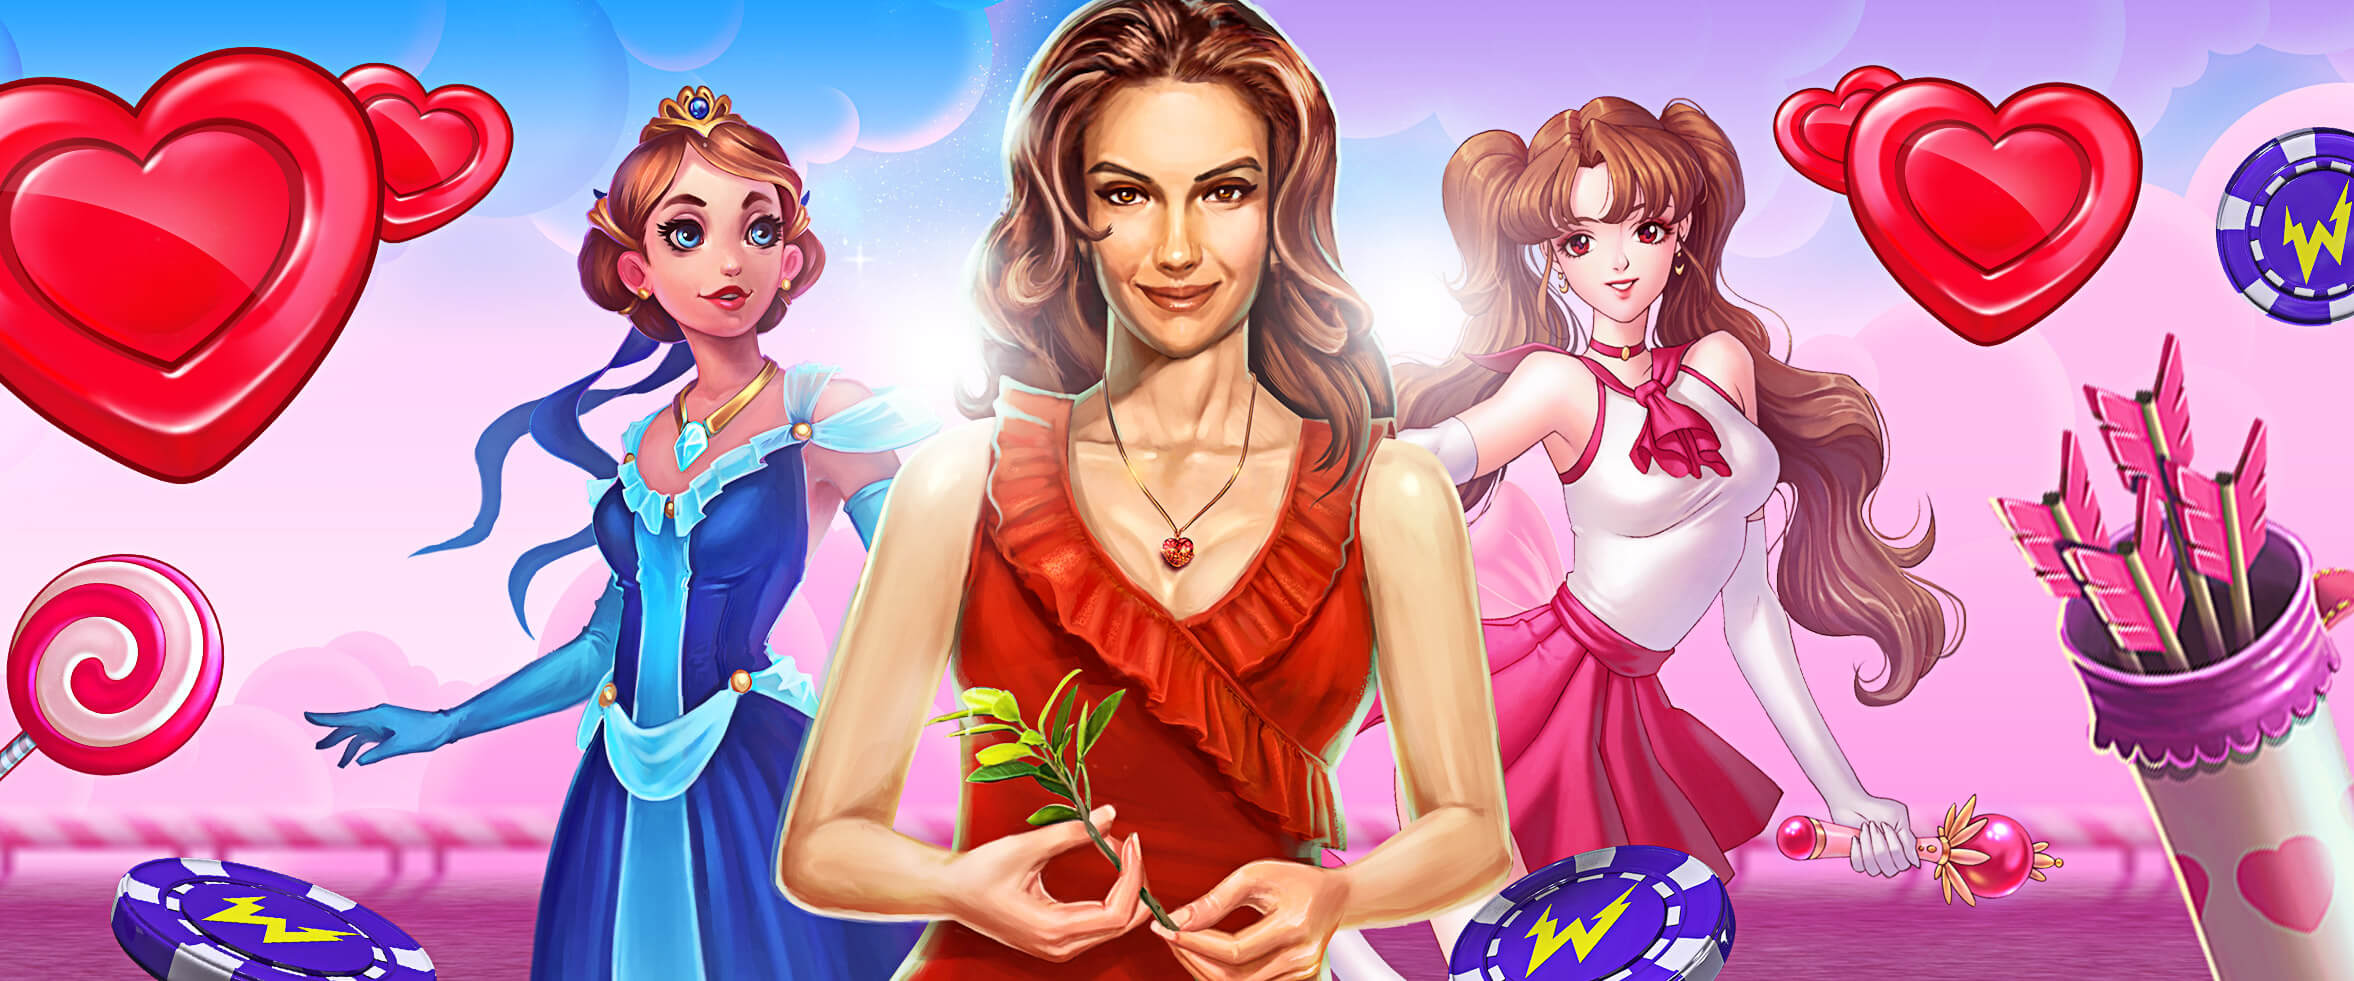 💘 Feel the Love With These Valentine-themed Slots 💘